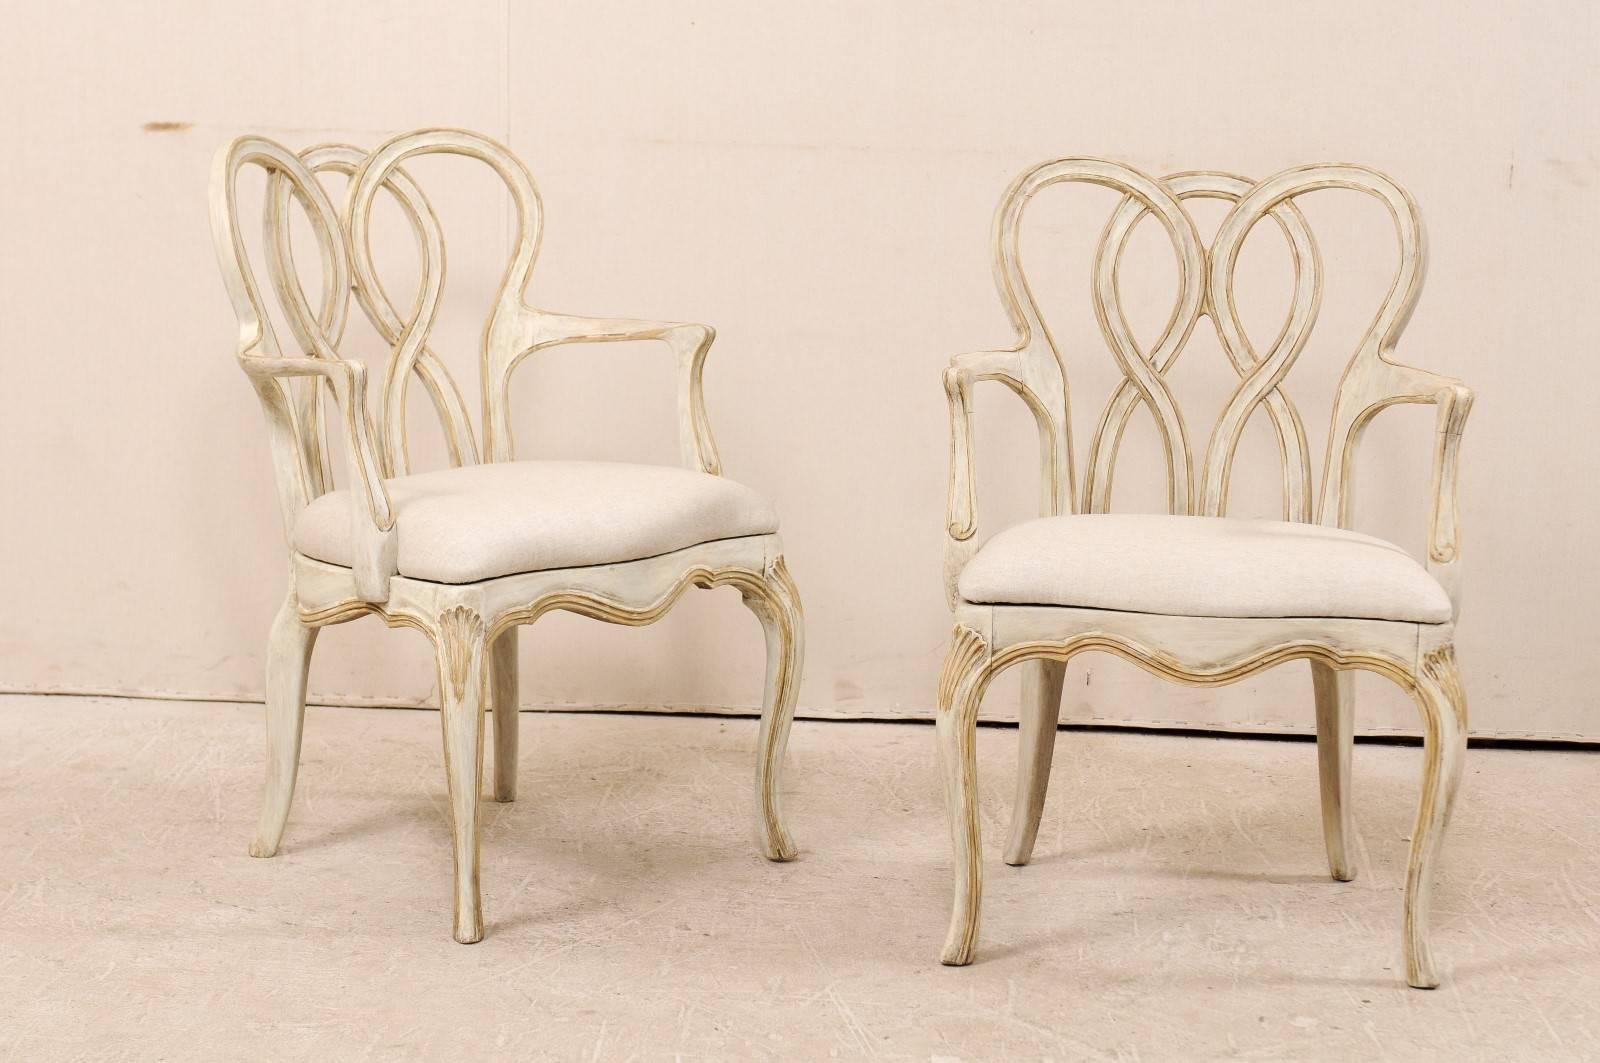 A pair of American made Italian Venetian style painted wood chairs. This Mid-Century pair of armchairs feature triple intertwined back-splats and beautifully scalloped skirts. The chairs are raised upon cabriole legs with carved shells at their